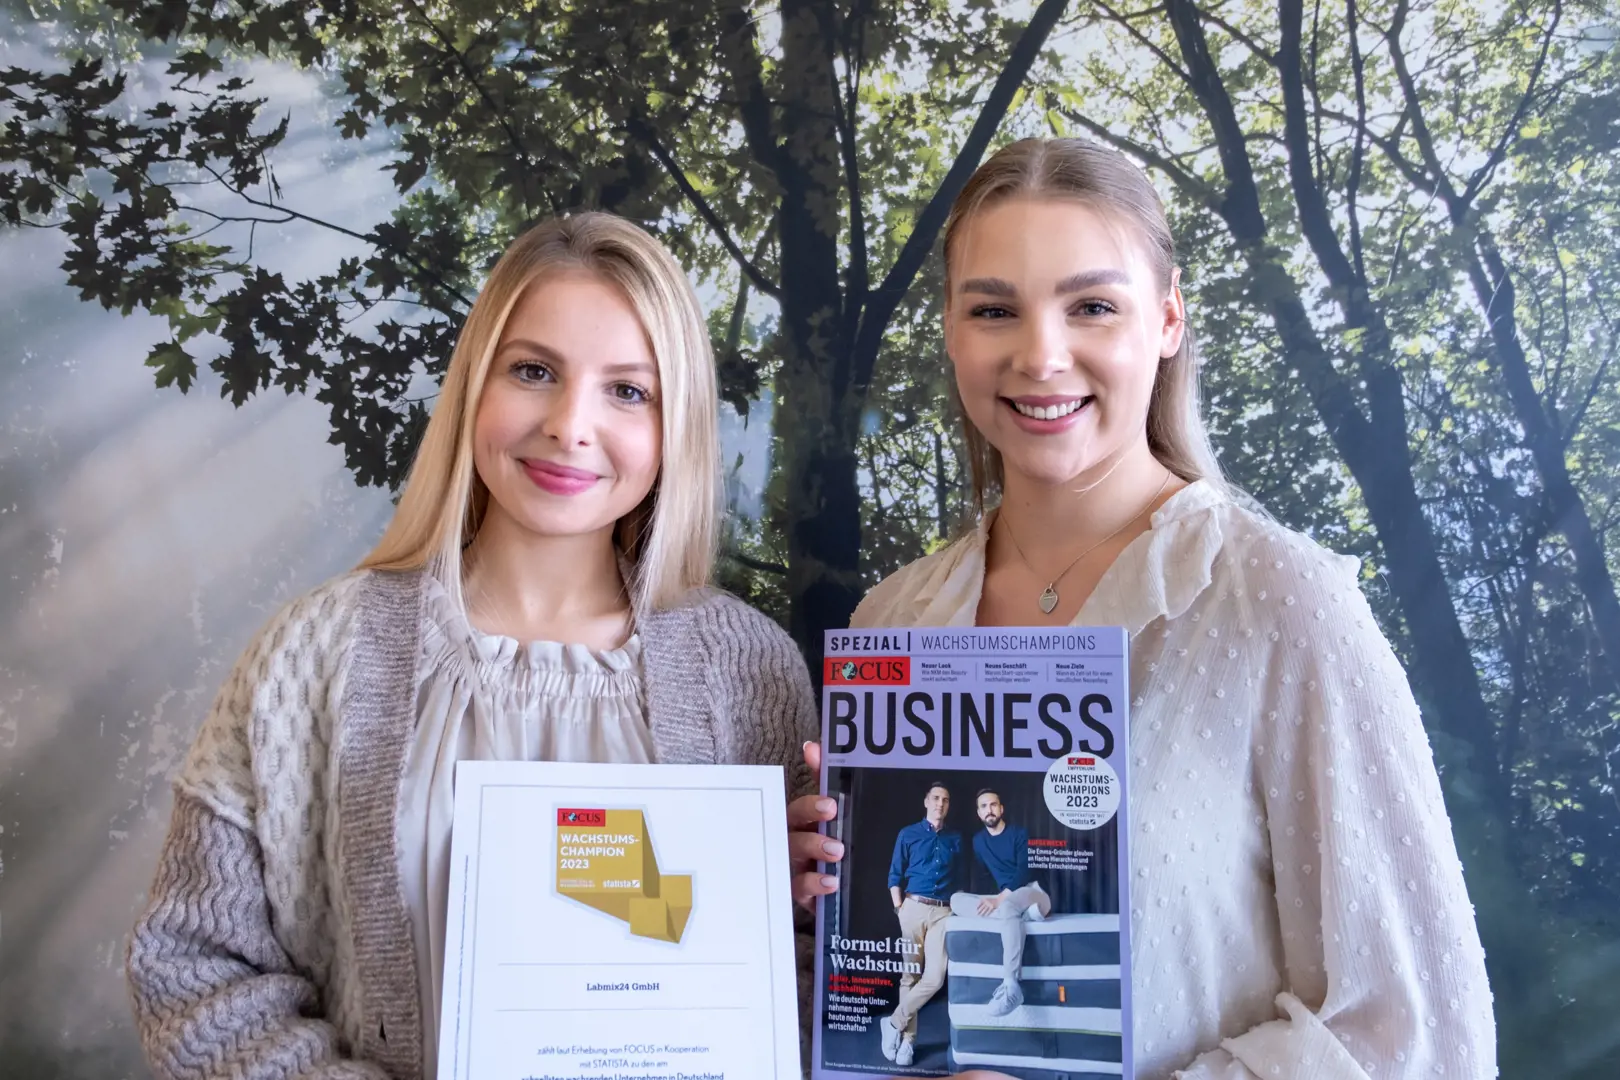 Pictured are Madeline Holzwarth (training supervisor) and Aileen Pikos (trainee) holding this year's certificate and the current issue of Focus Business